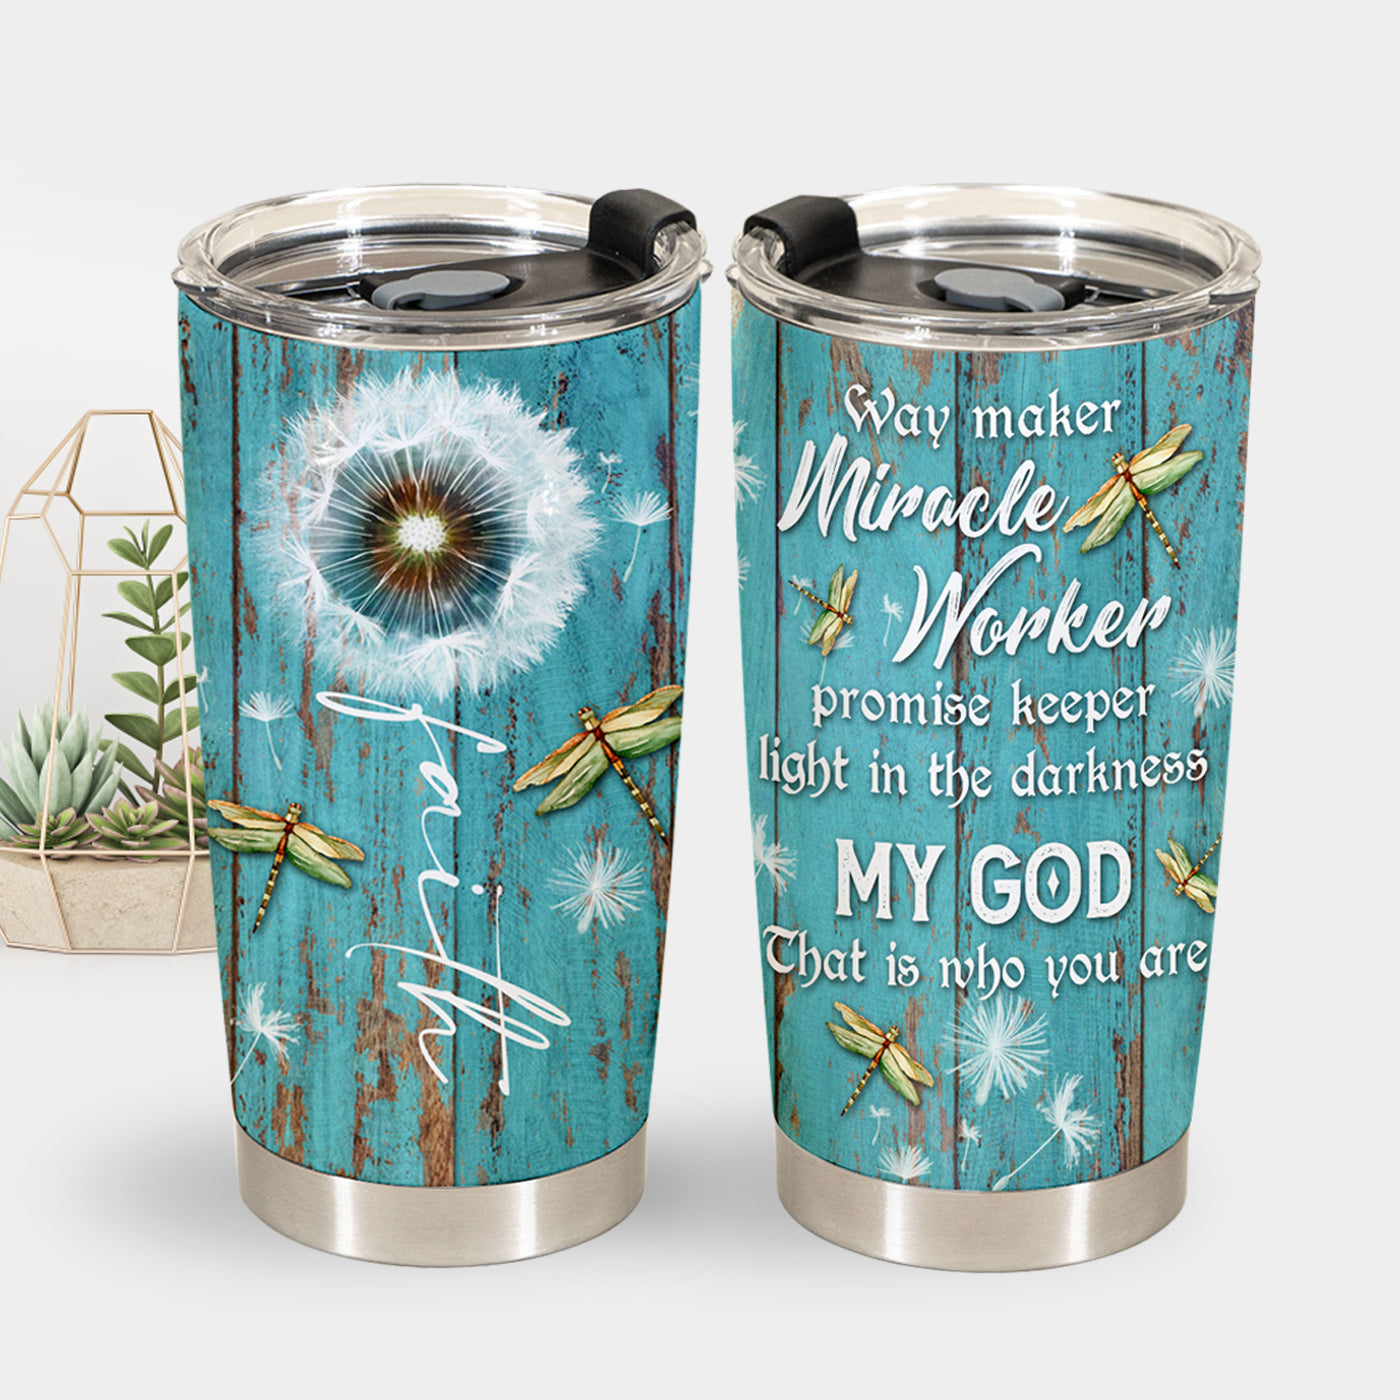 Best Custom Dragonfly Gift for Women - Boho Gifts for Women With Positive Inspirational Quote - Motivational, Religious, Spiritual, Inspirational 20oz Stainless Steel Tumbler Gifts for Women + 1666690036329.jpg